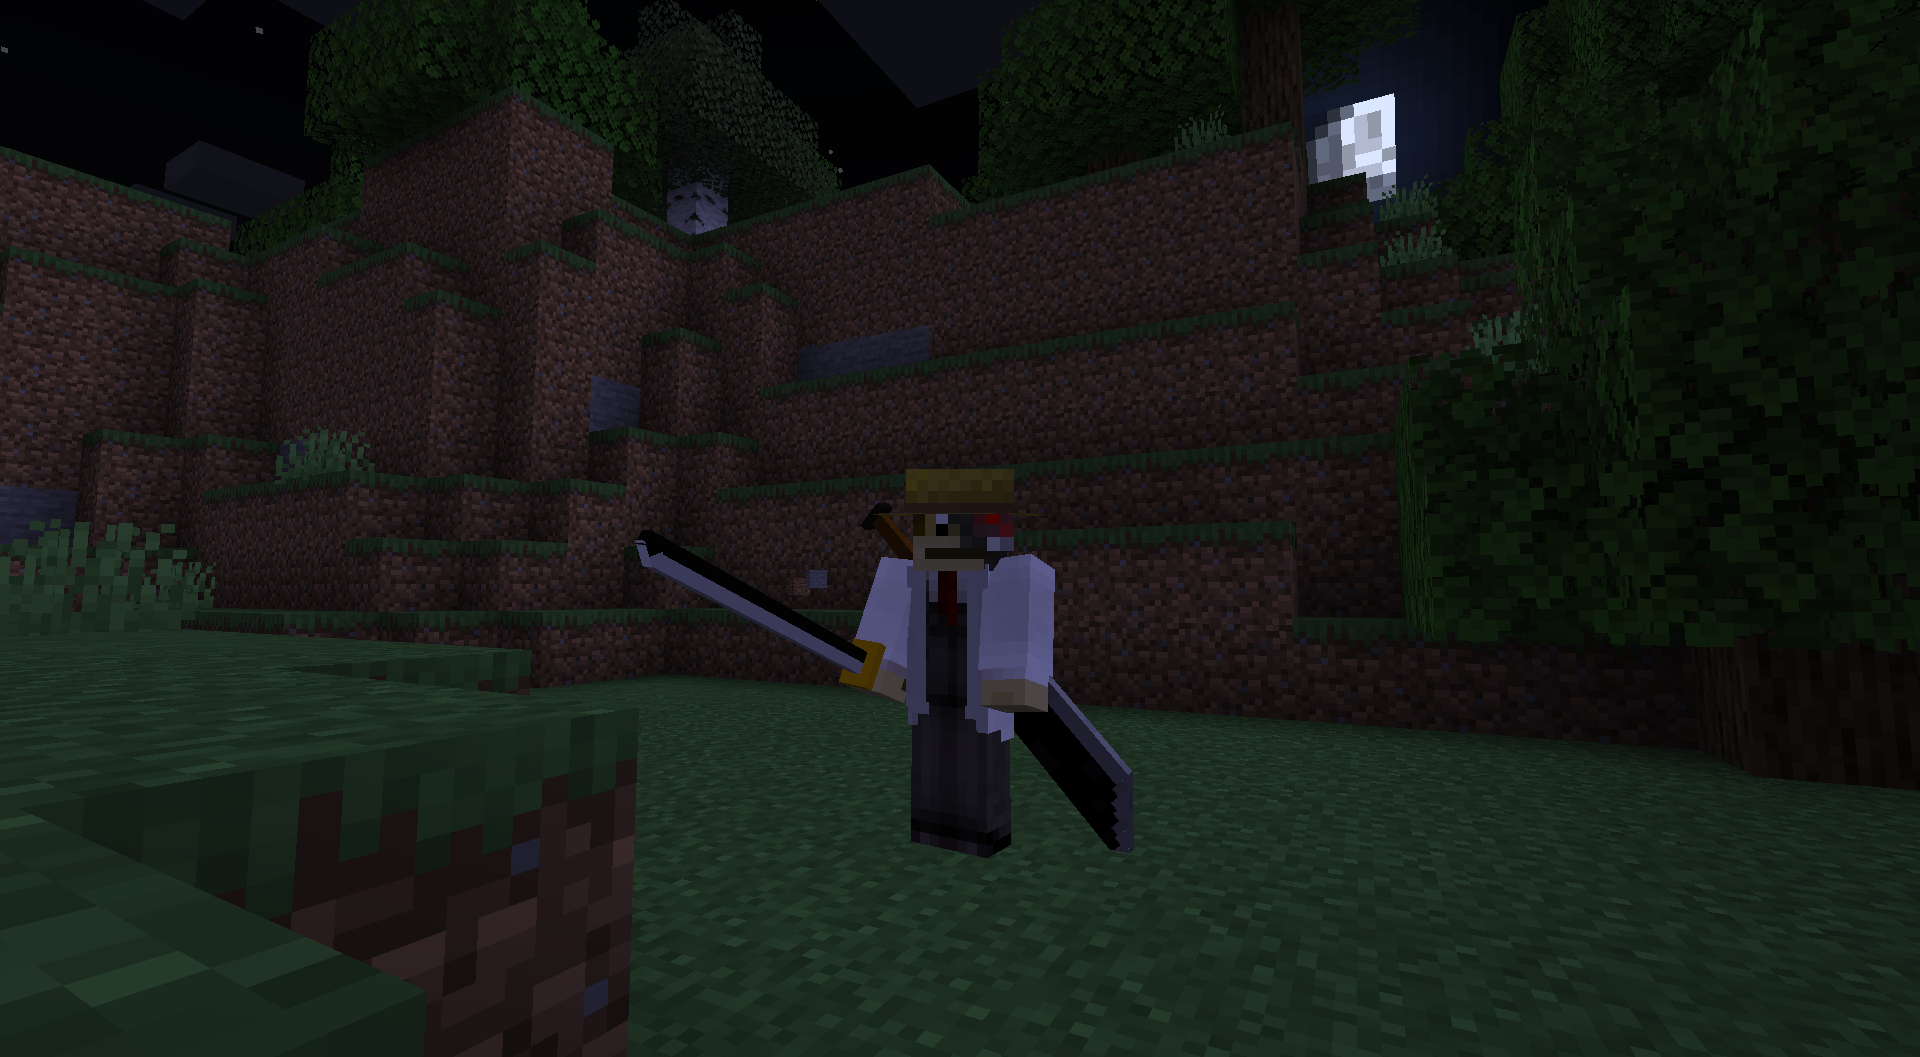 Example of having some custom models on weapons and pumpkins using vanilla resource packs.